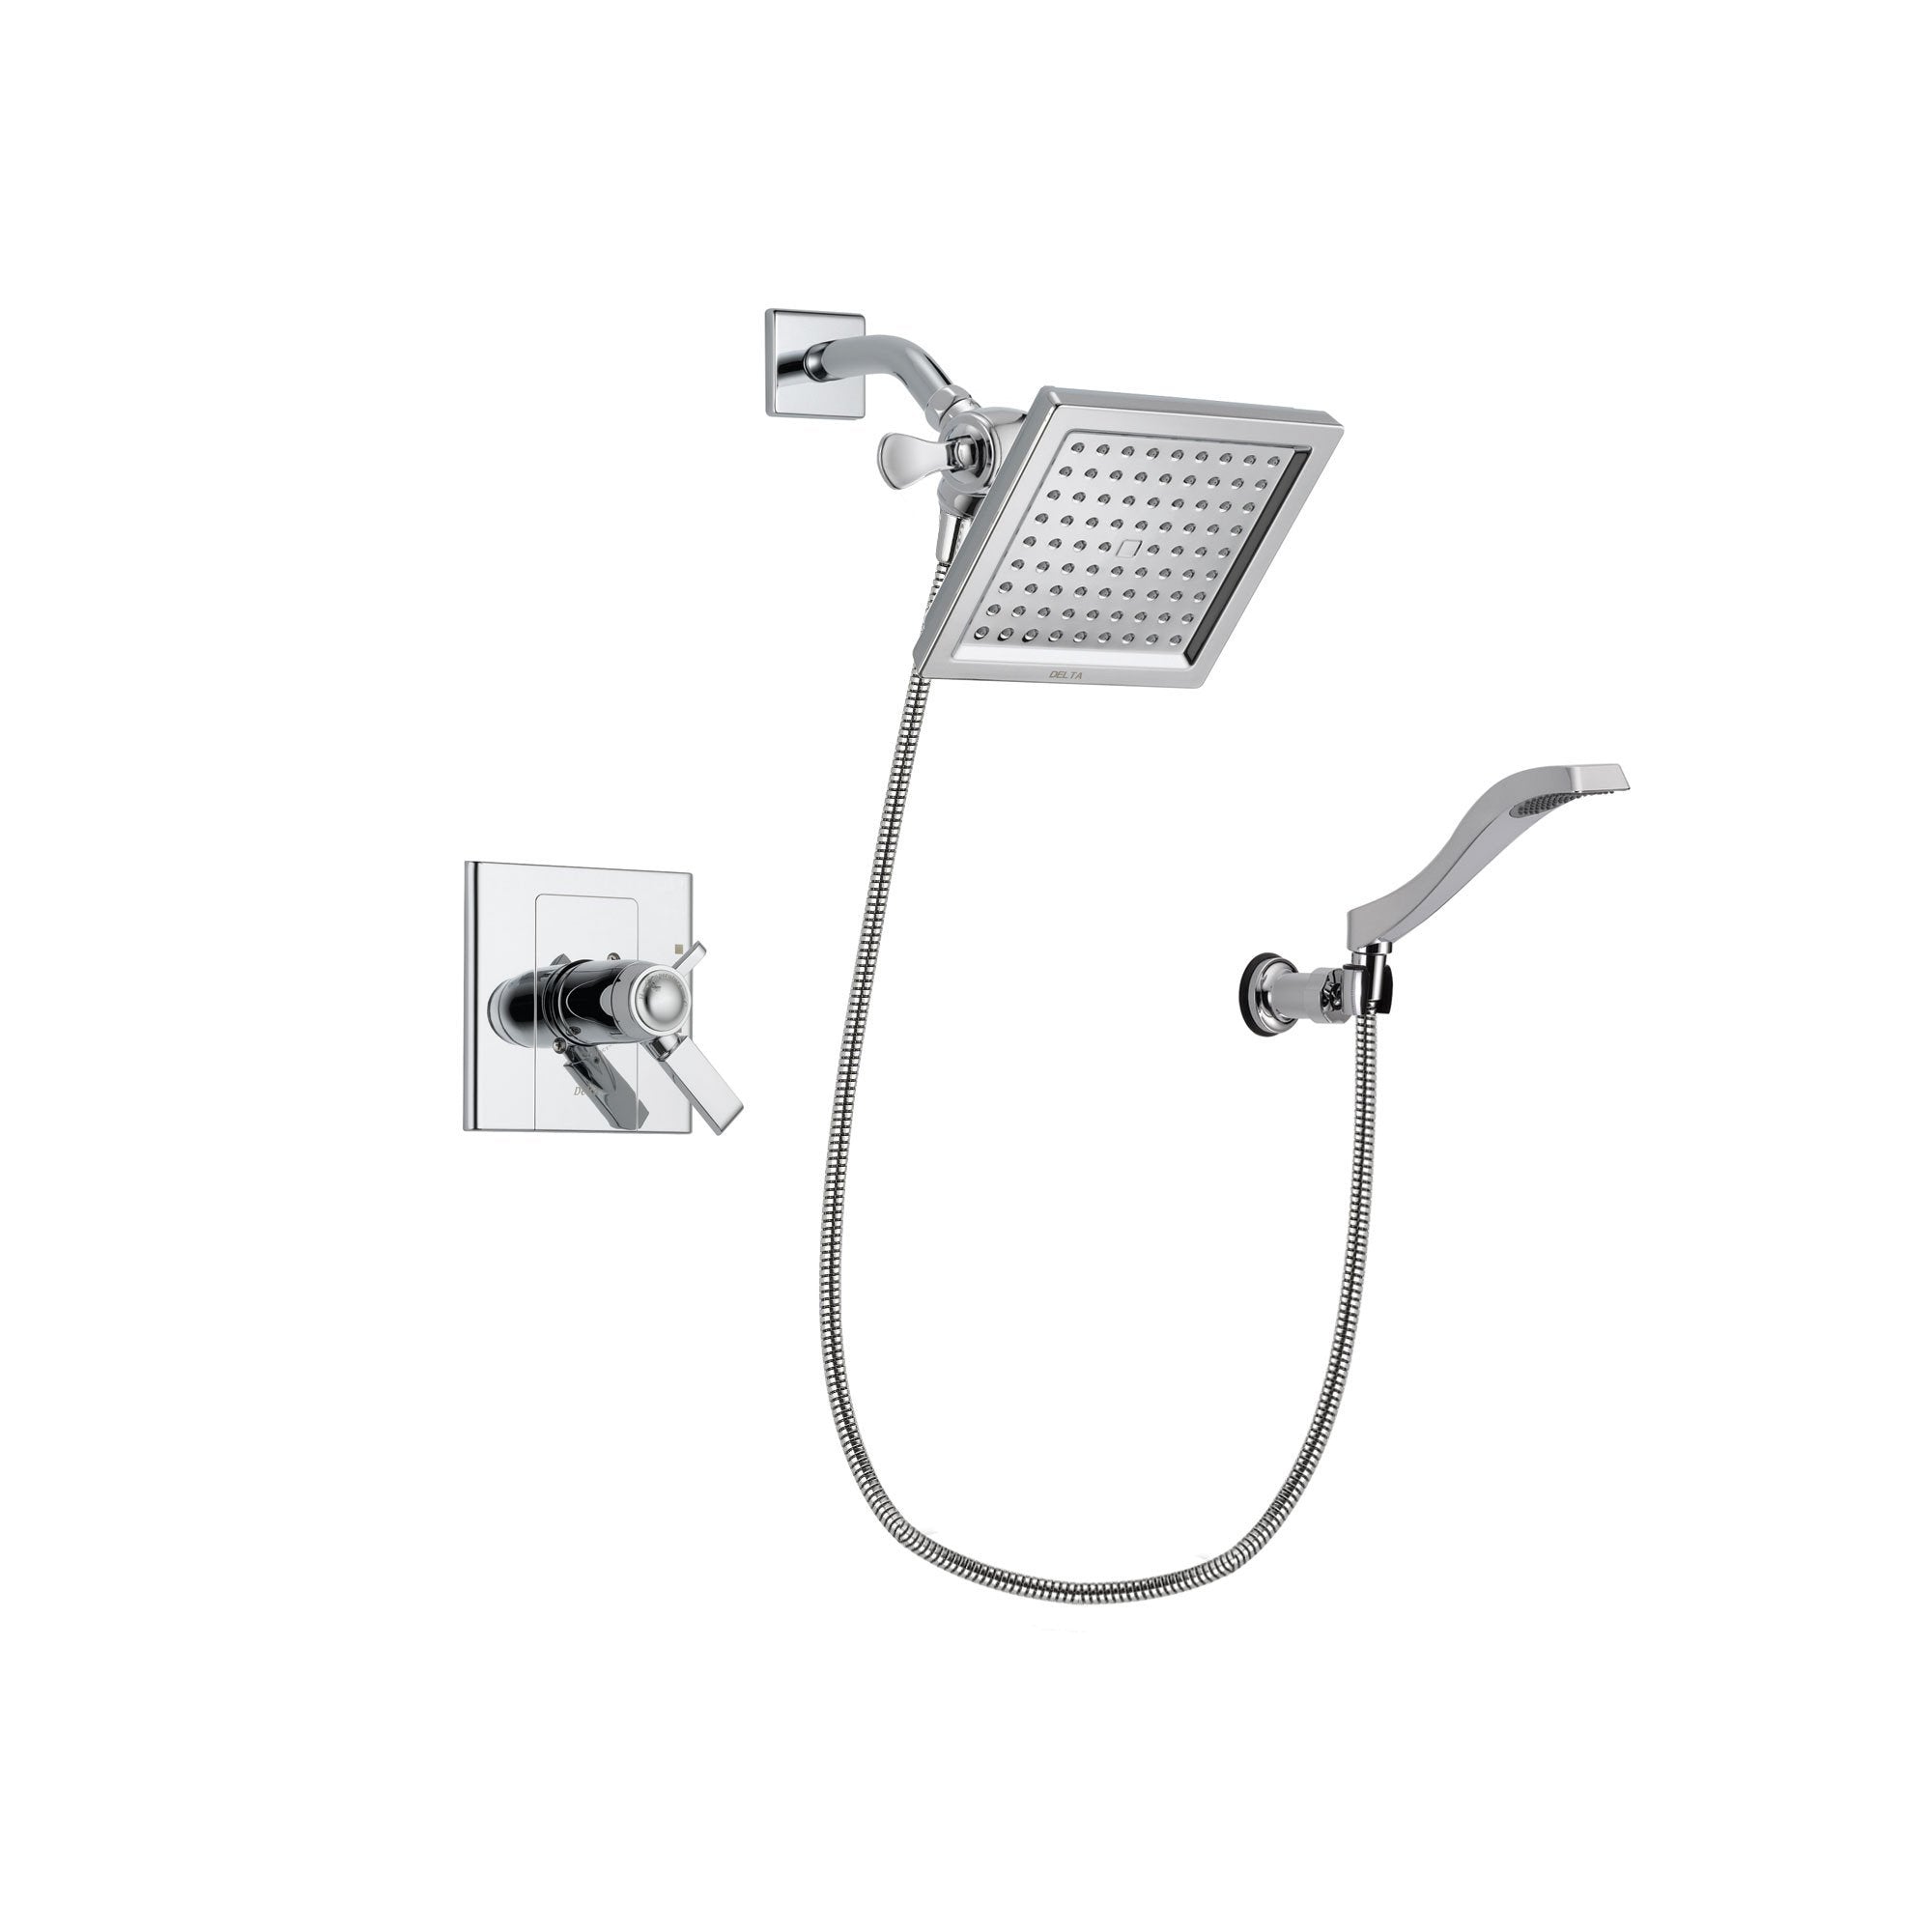 Delta Arzo Chrome Finish Thermostatic Shower Faucet System Package with 6.5-inch Square Rain Showerhead and Modern Handheld Shower Spray with Wall Bracket and Hose Includes Rough-in Valve DSP0021V